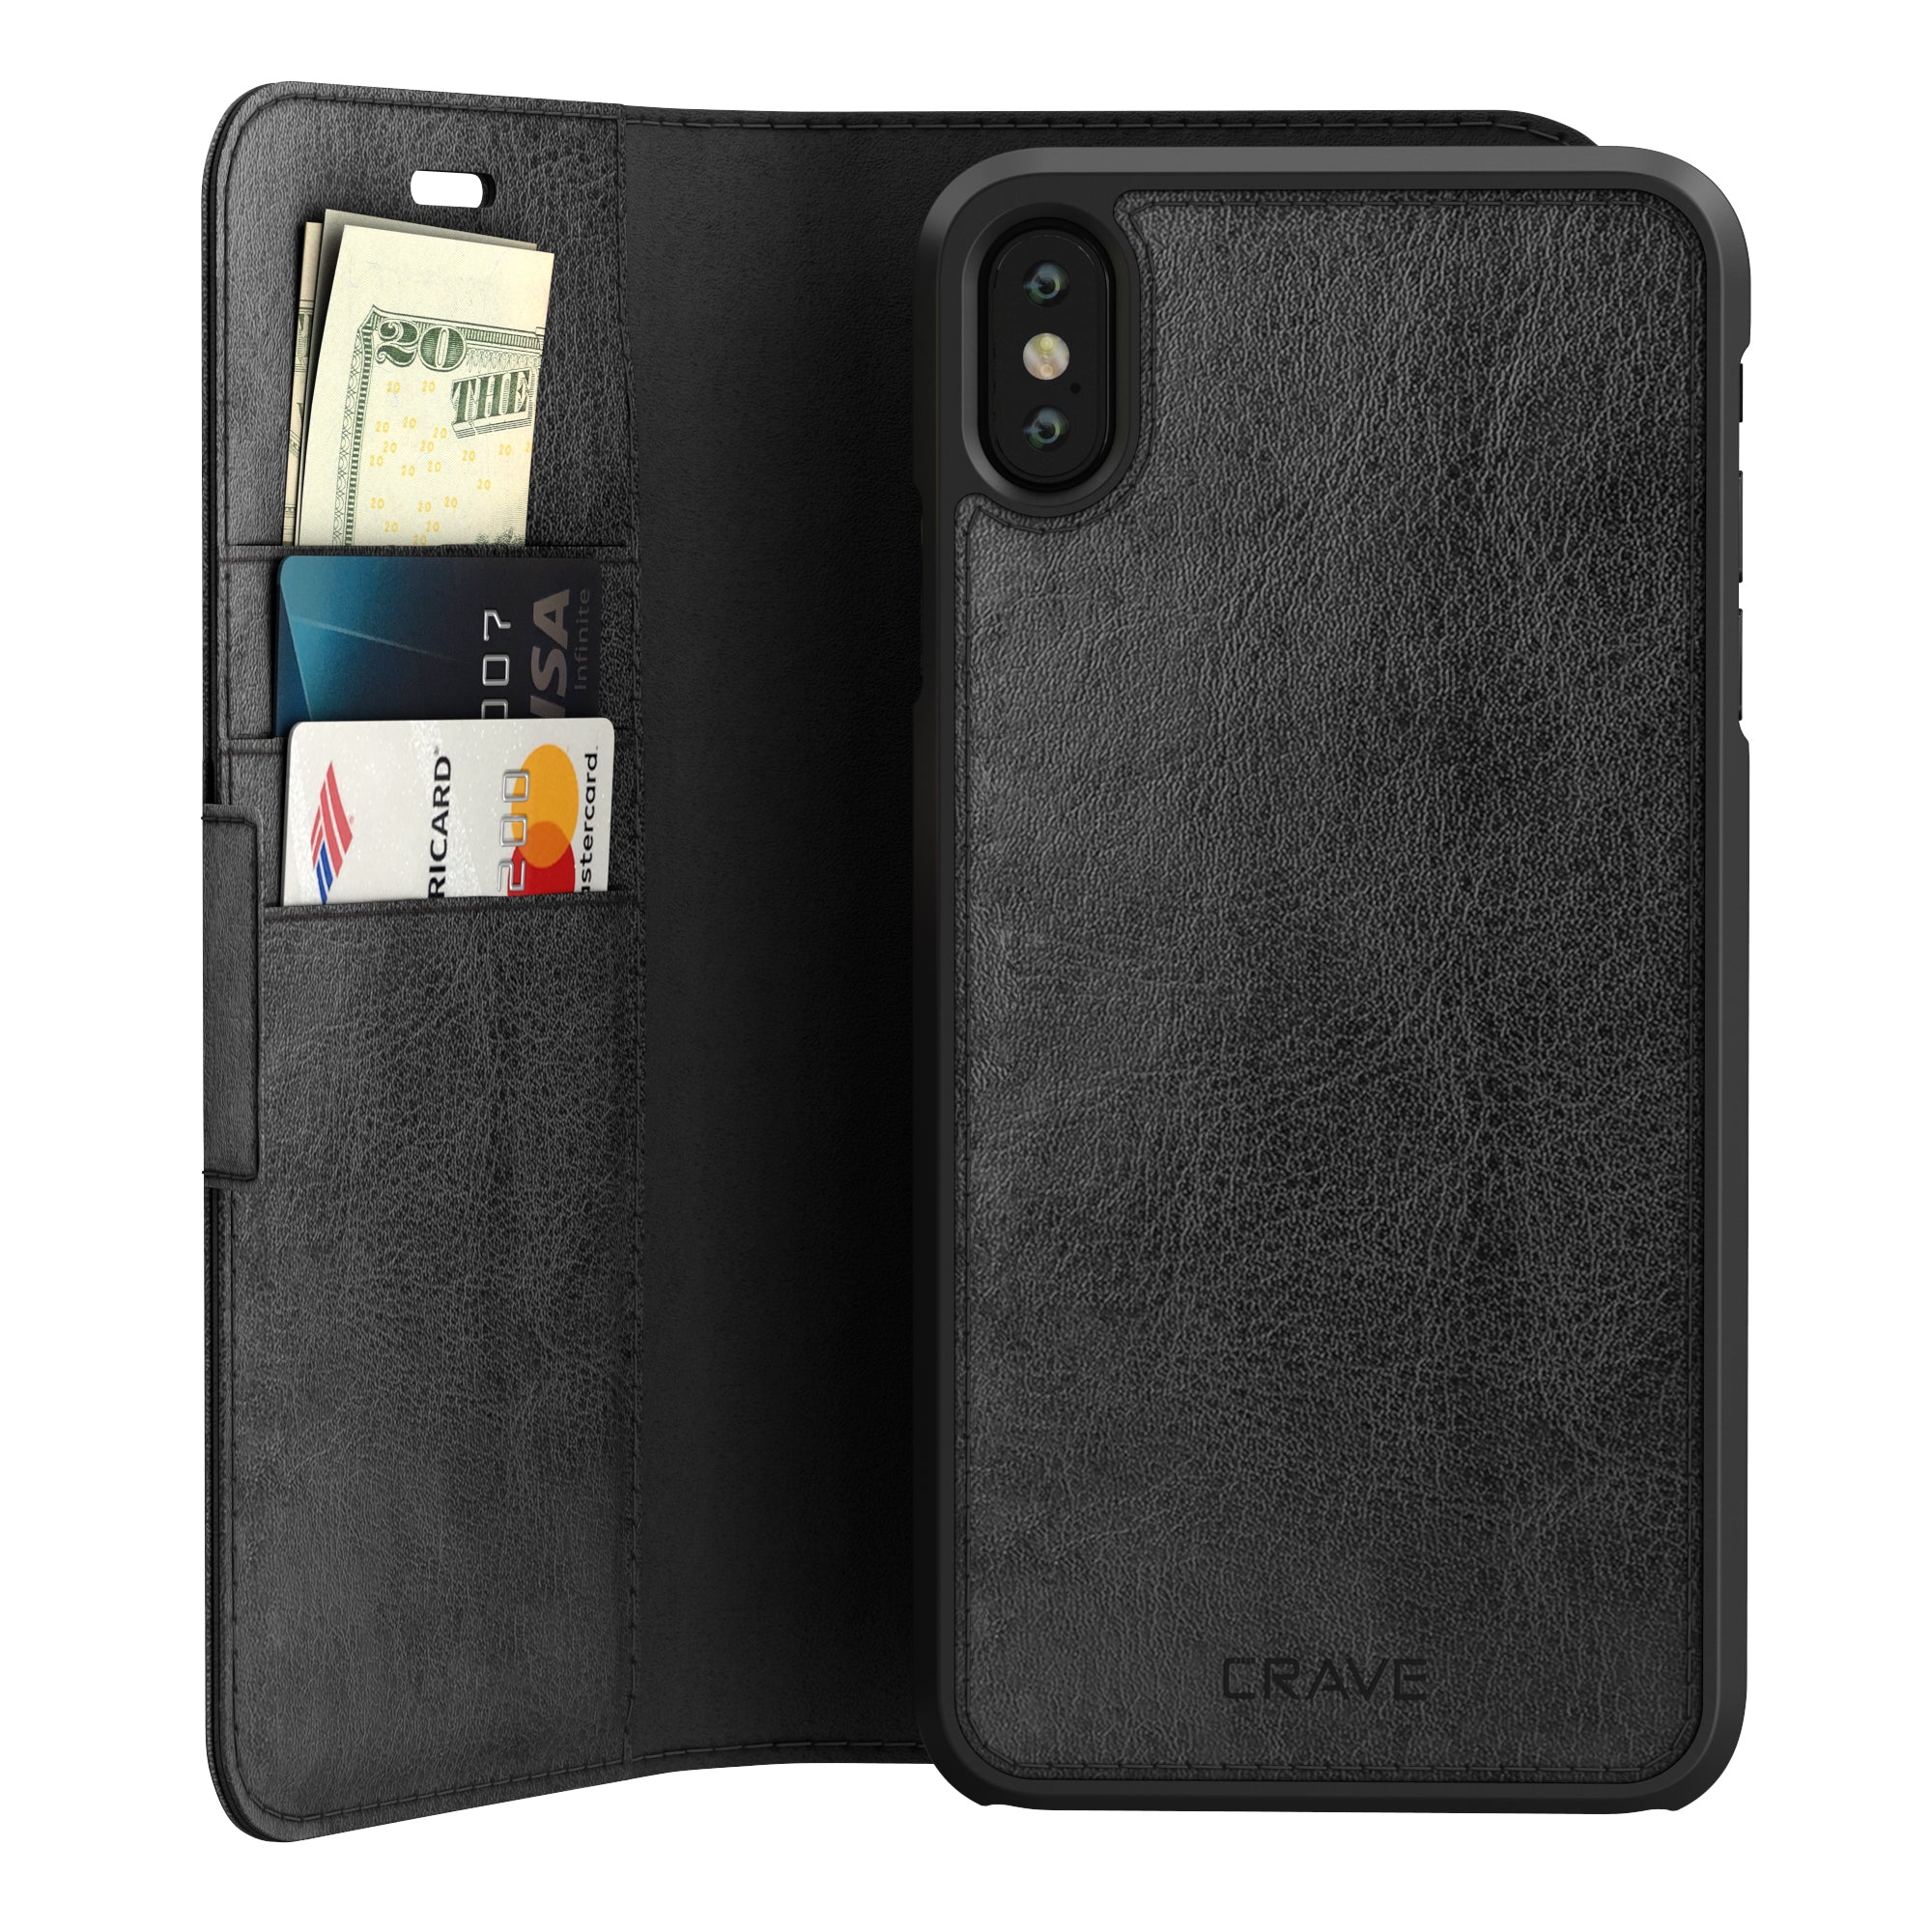 iPhone XS Max Case Vegan Leather Wallet, Leather Guard